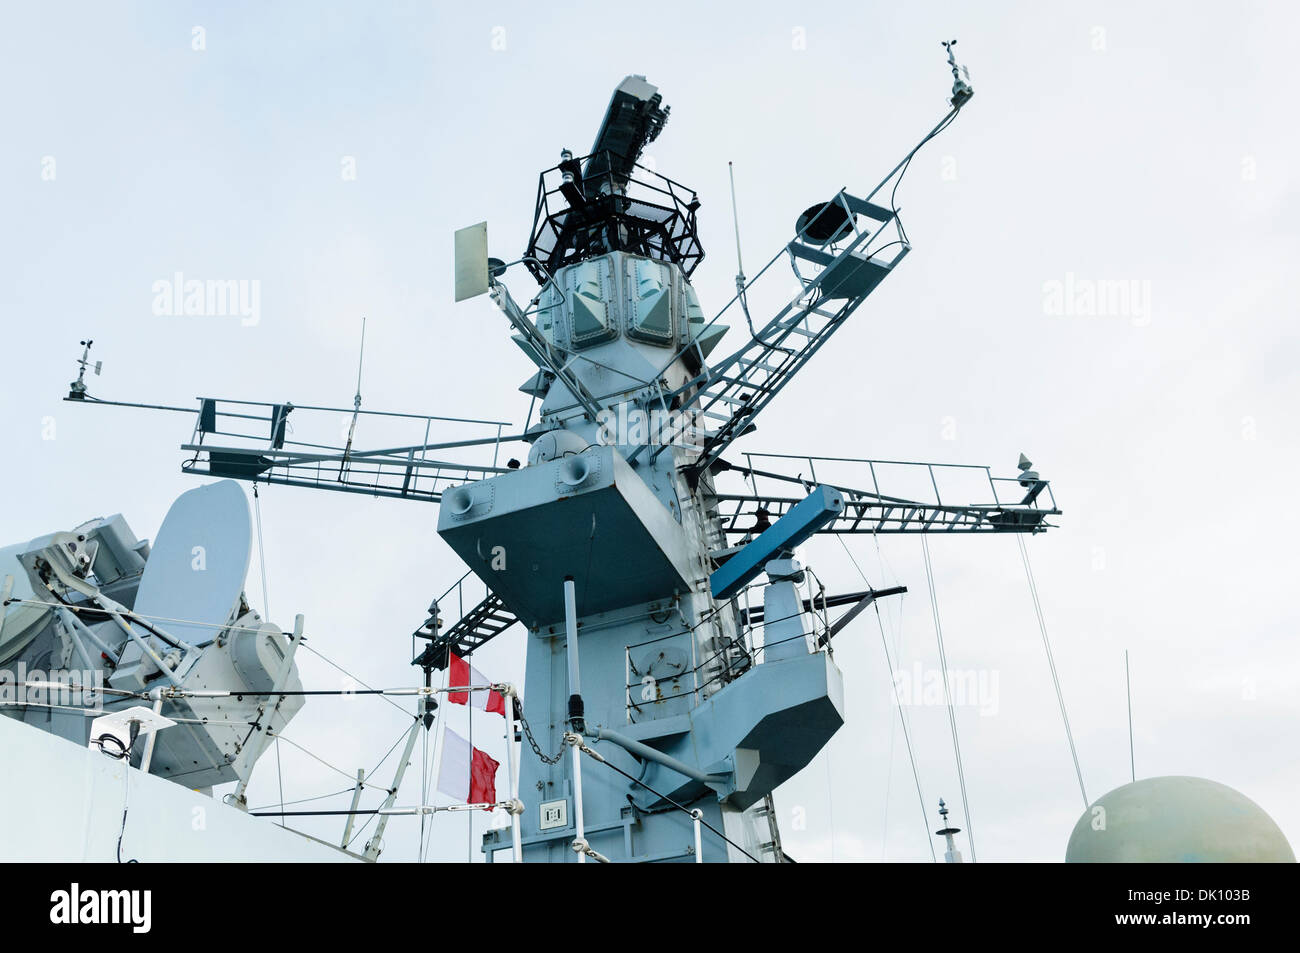 Belfast, Northern Ireland. 30th Nov 2013 - Communications tower of HMS Monmouth, a Royal Navy type 23 Frigate, visits Belfast after being stationed in the Gulf. Credit:  Stephen Barnes/Alamy Live News Stock Photo